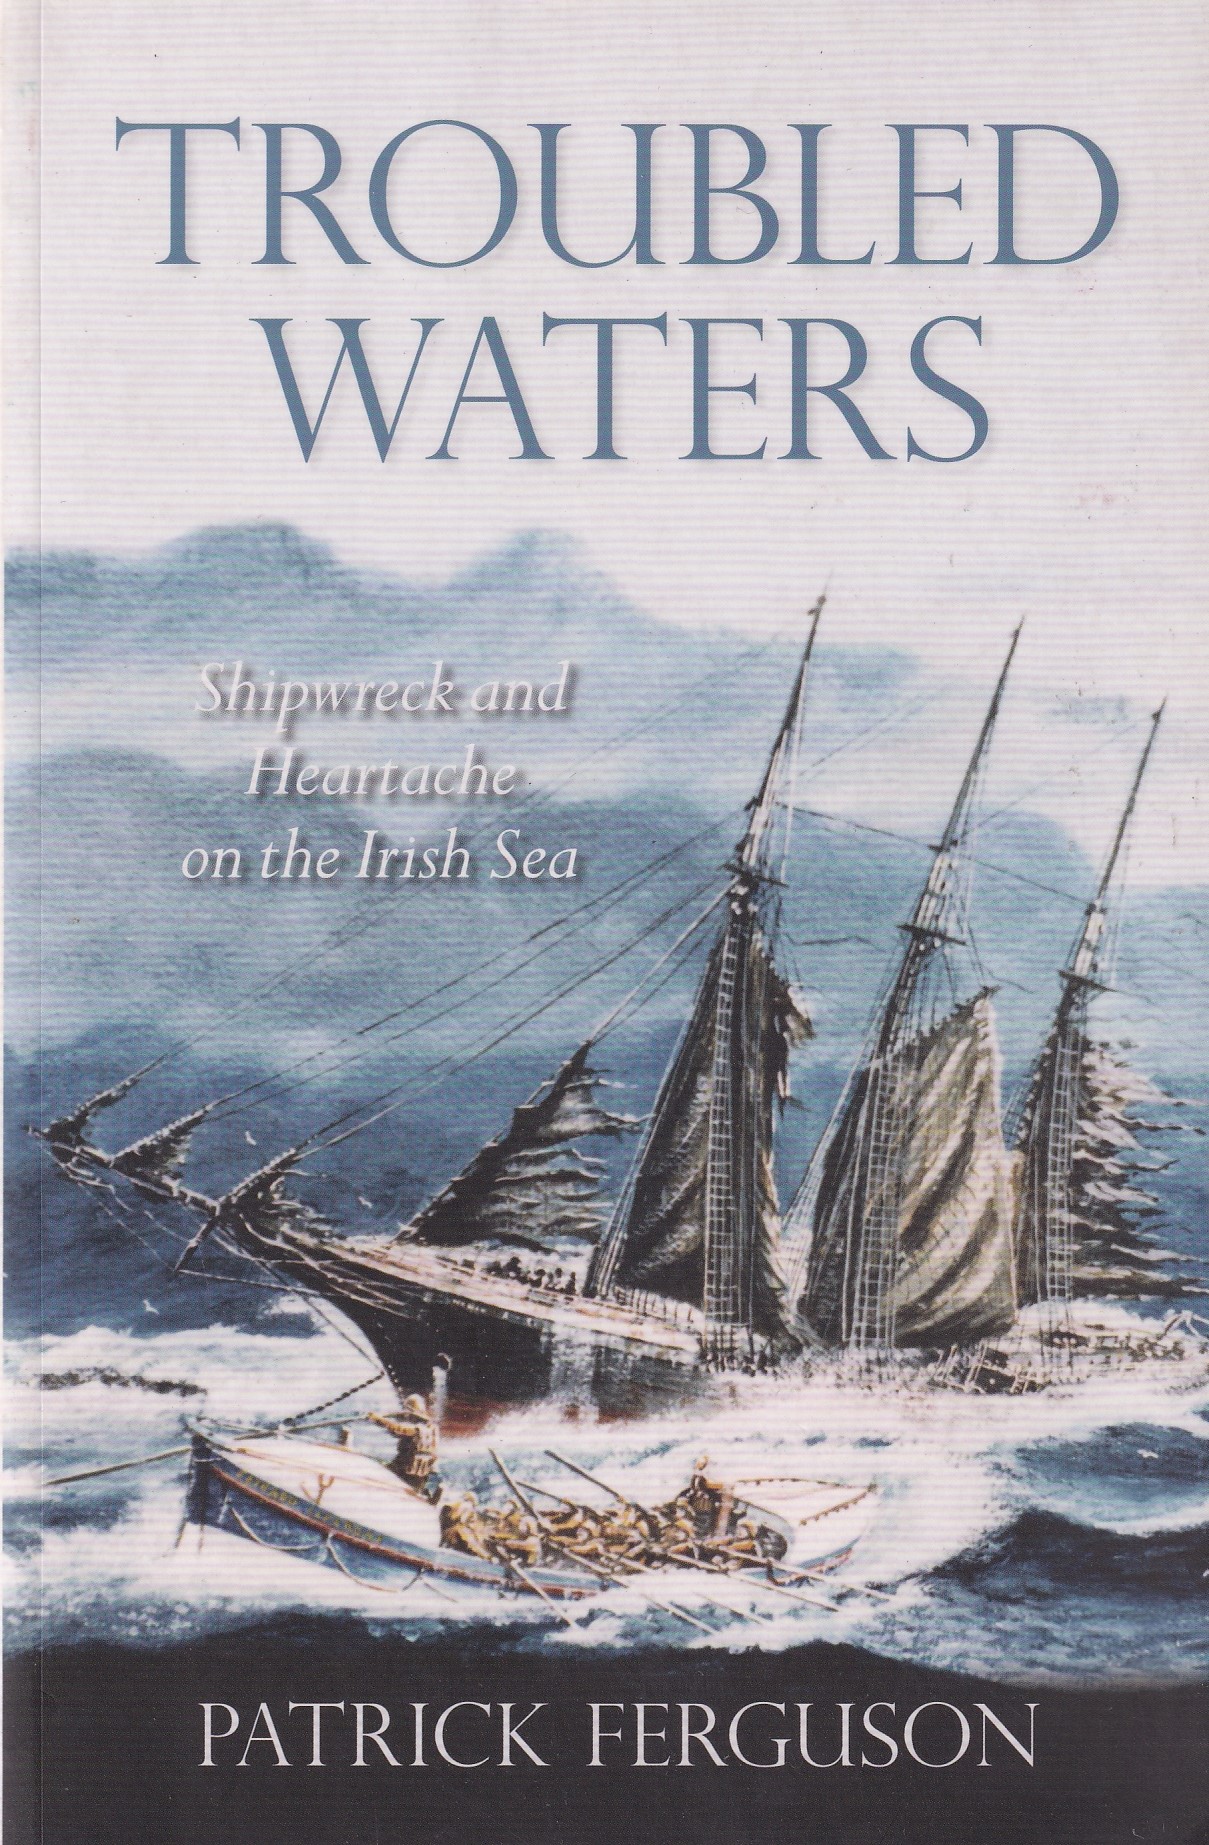 Troubled Waters: Shipwreck and Heartache on the Irish Sea by Patrick Ferguson